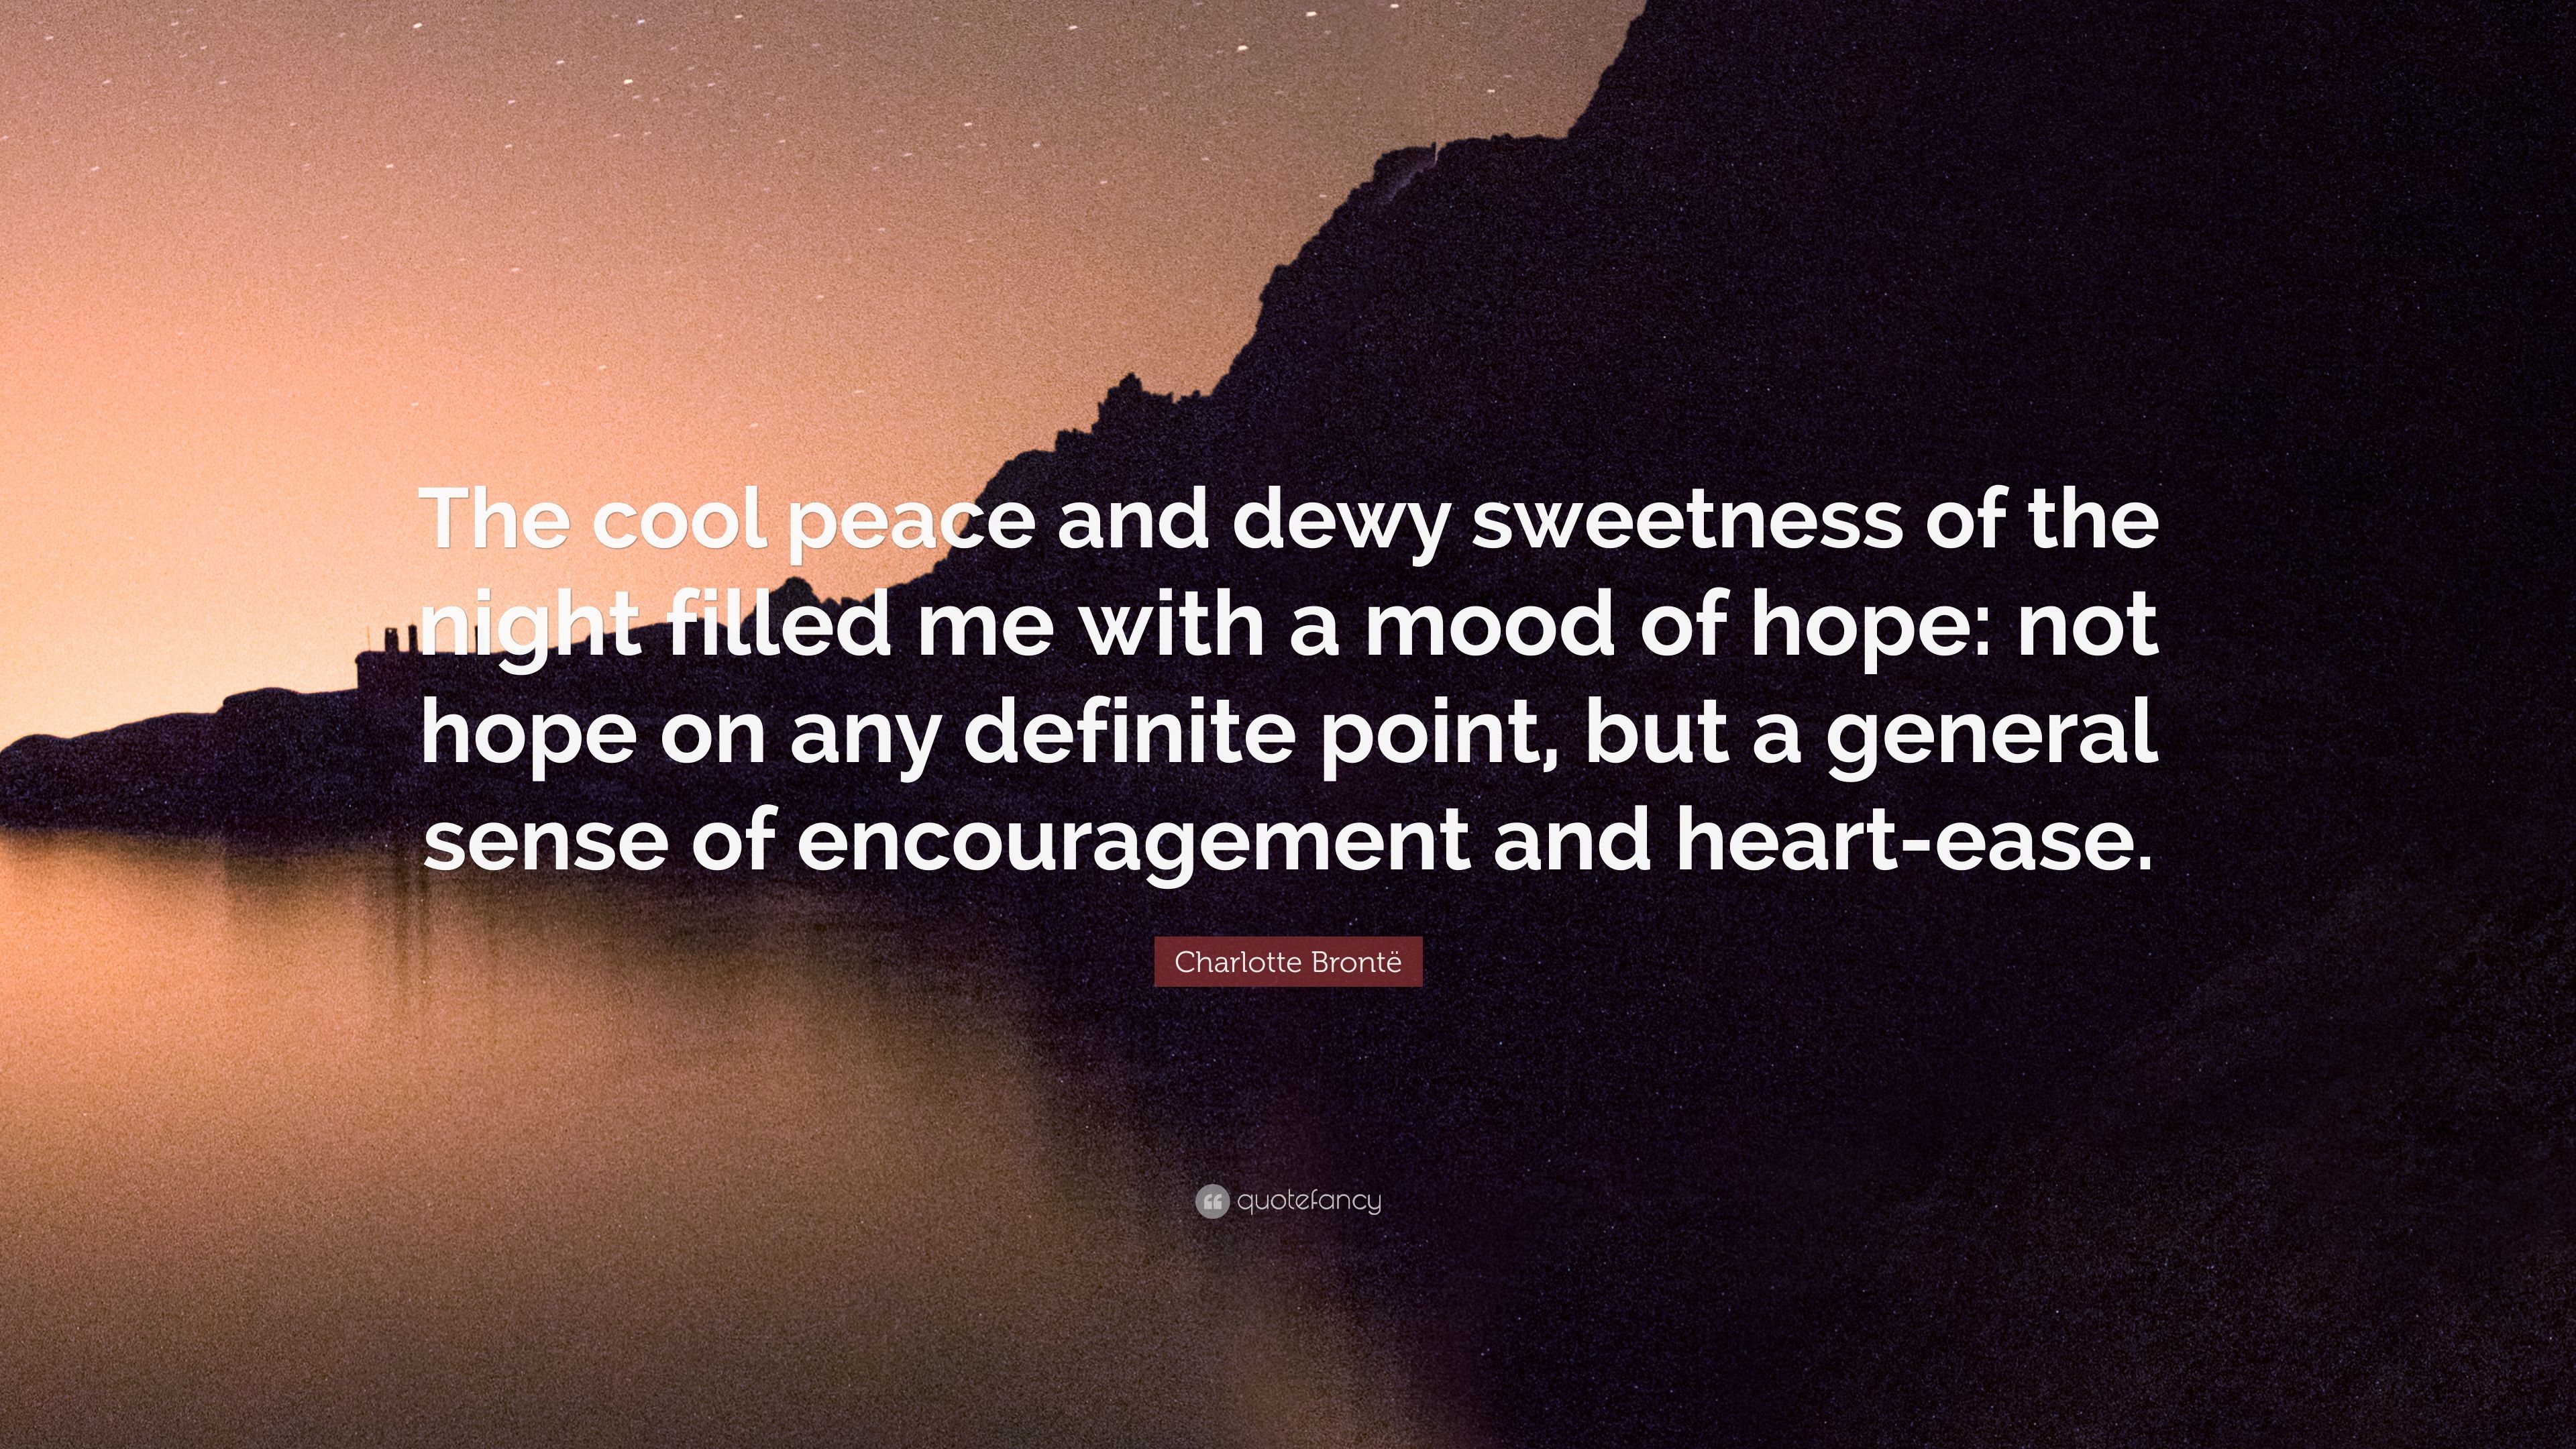 Charlotte Brontë Quote: “The cool peace and dewy sweetness